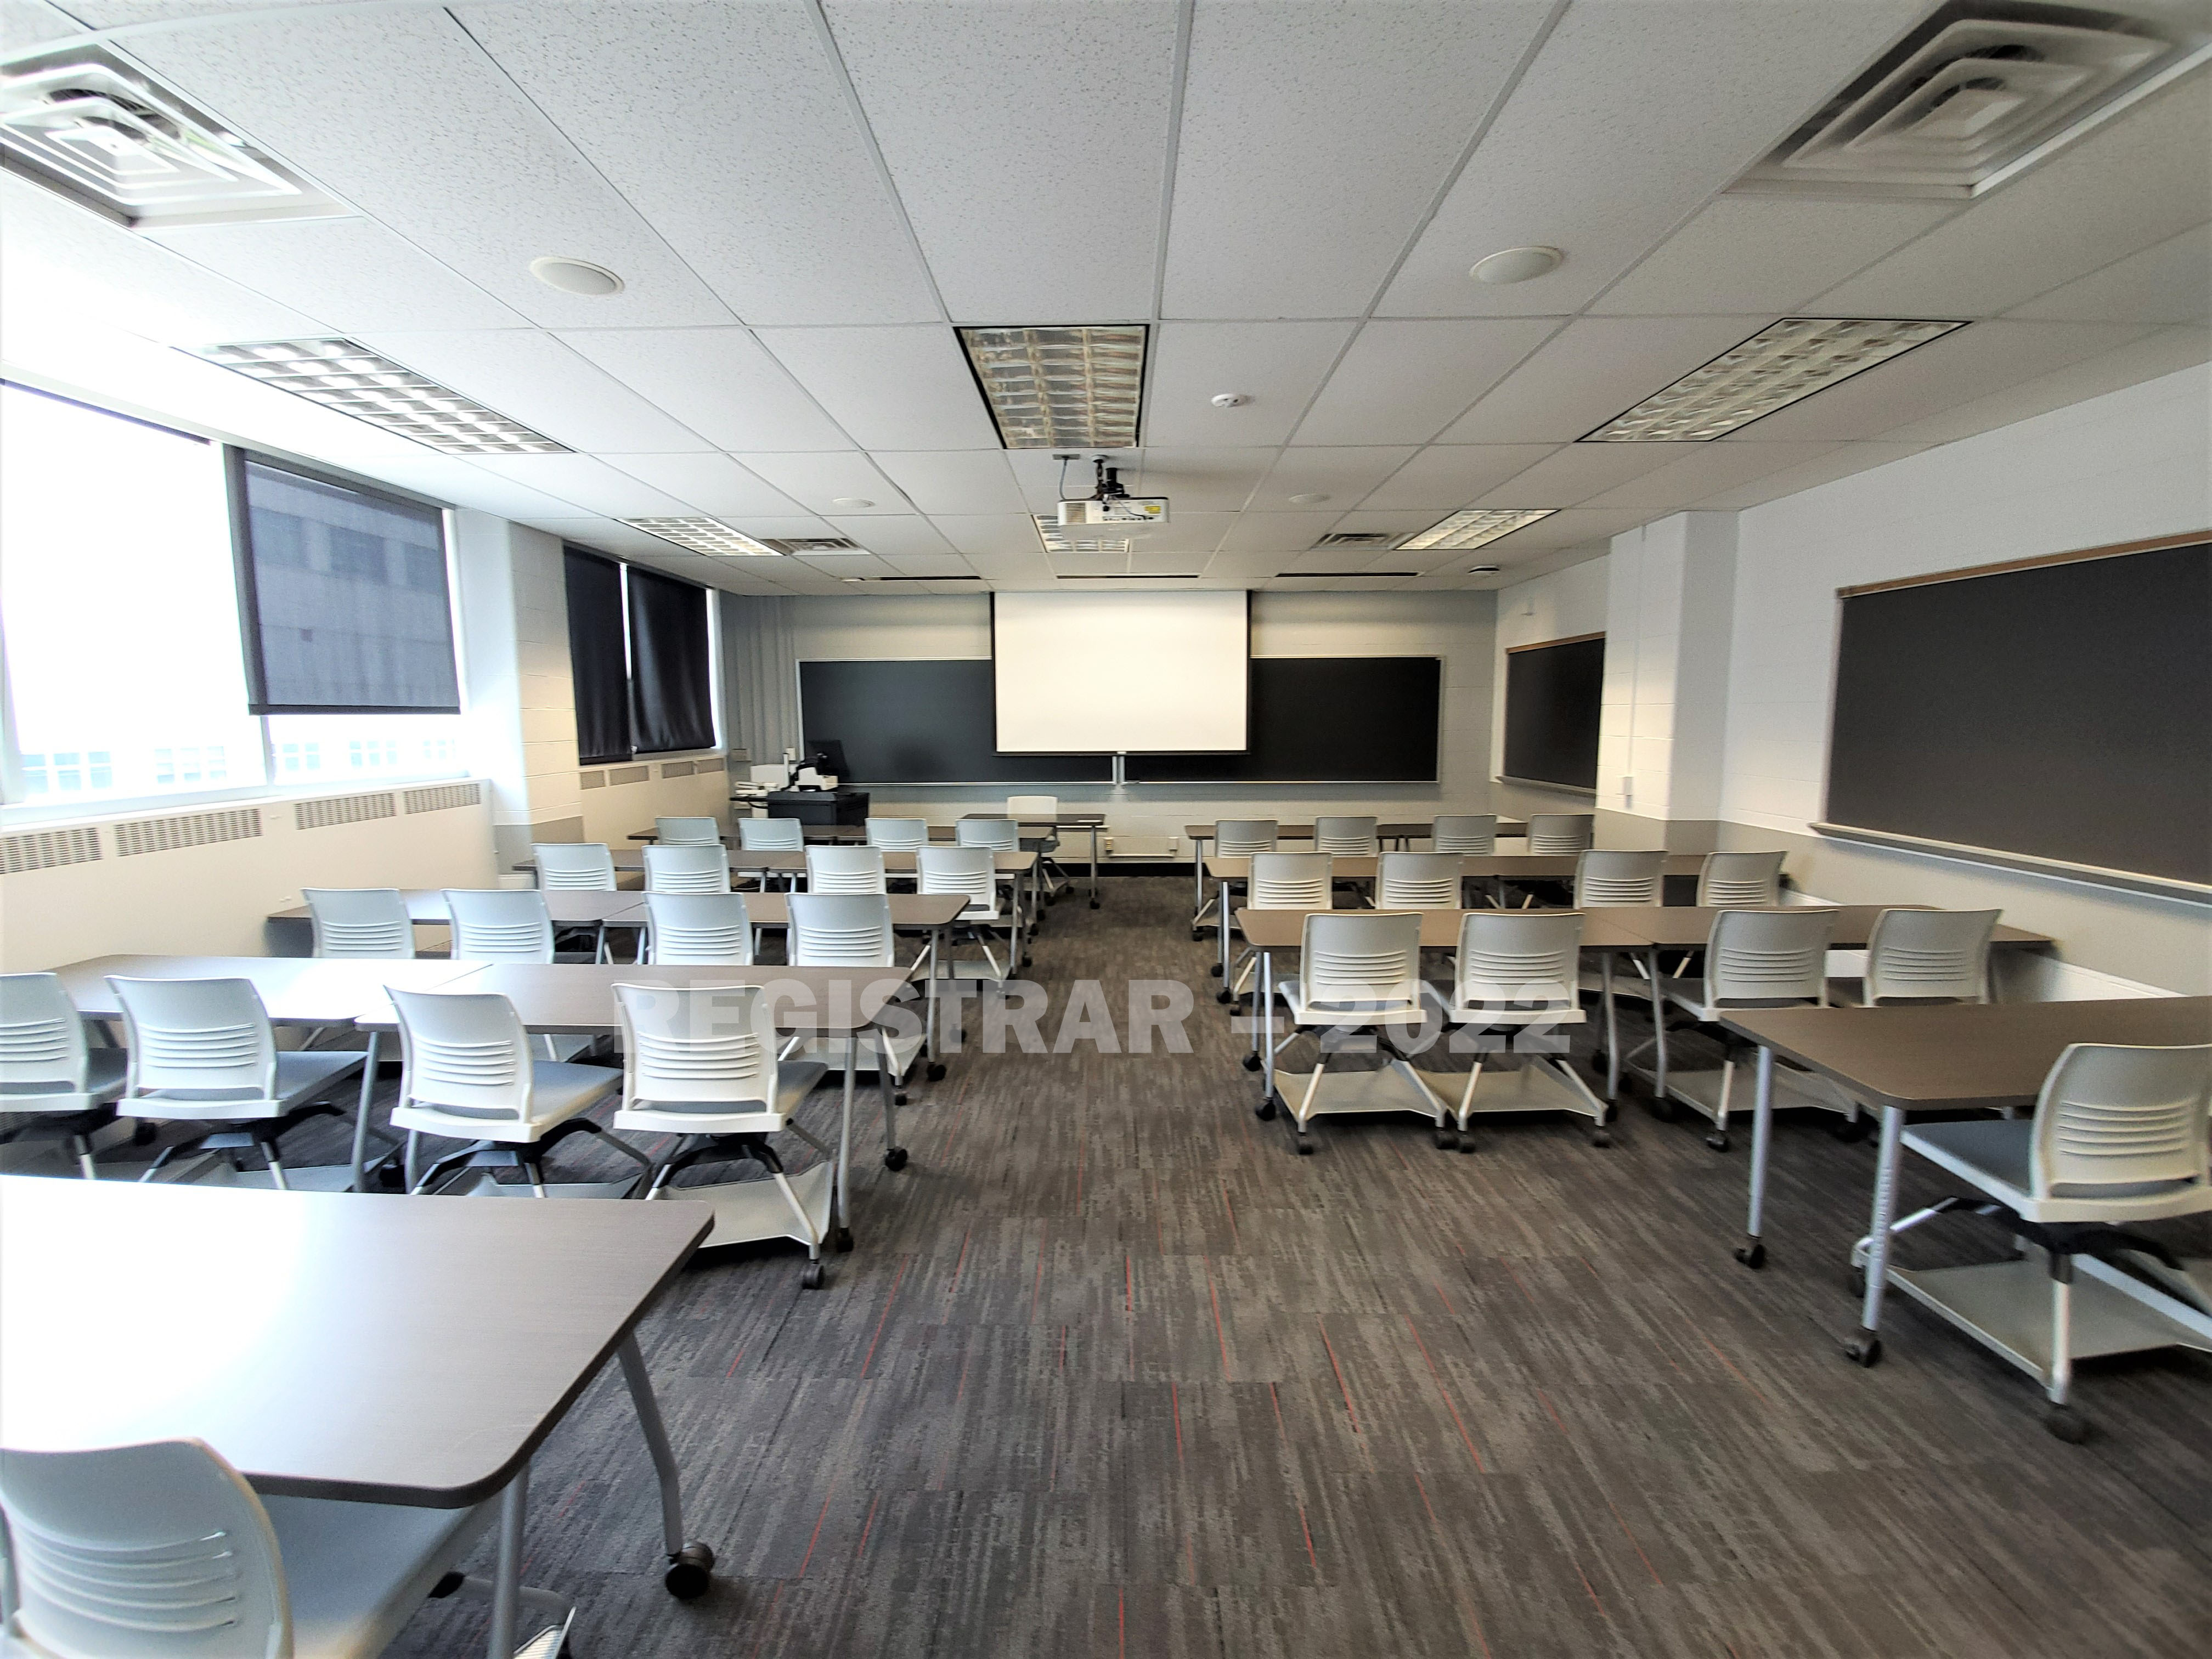 Bolz Hall room 316 ultra wide angle view from the back of the room with projector screen down